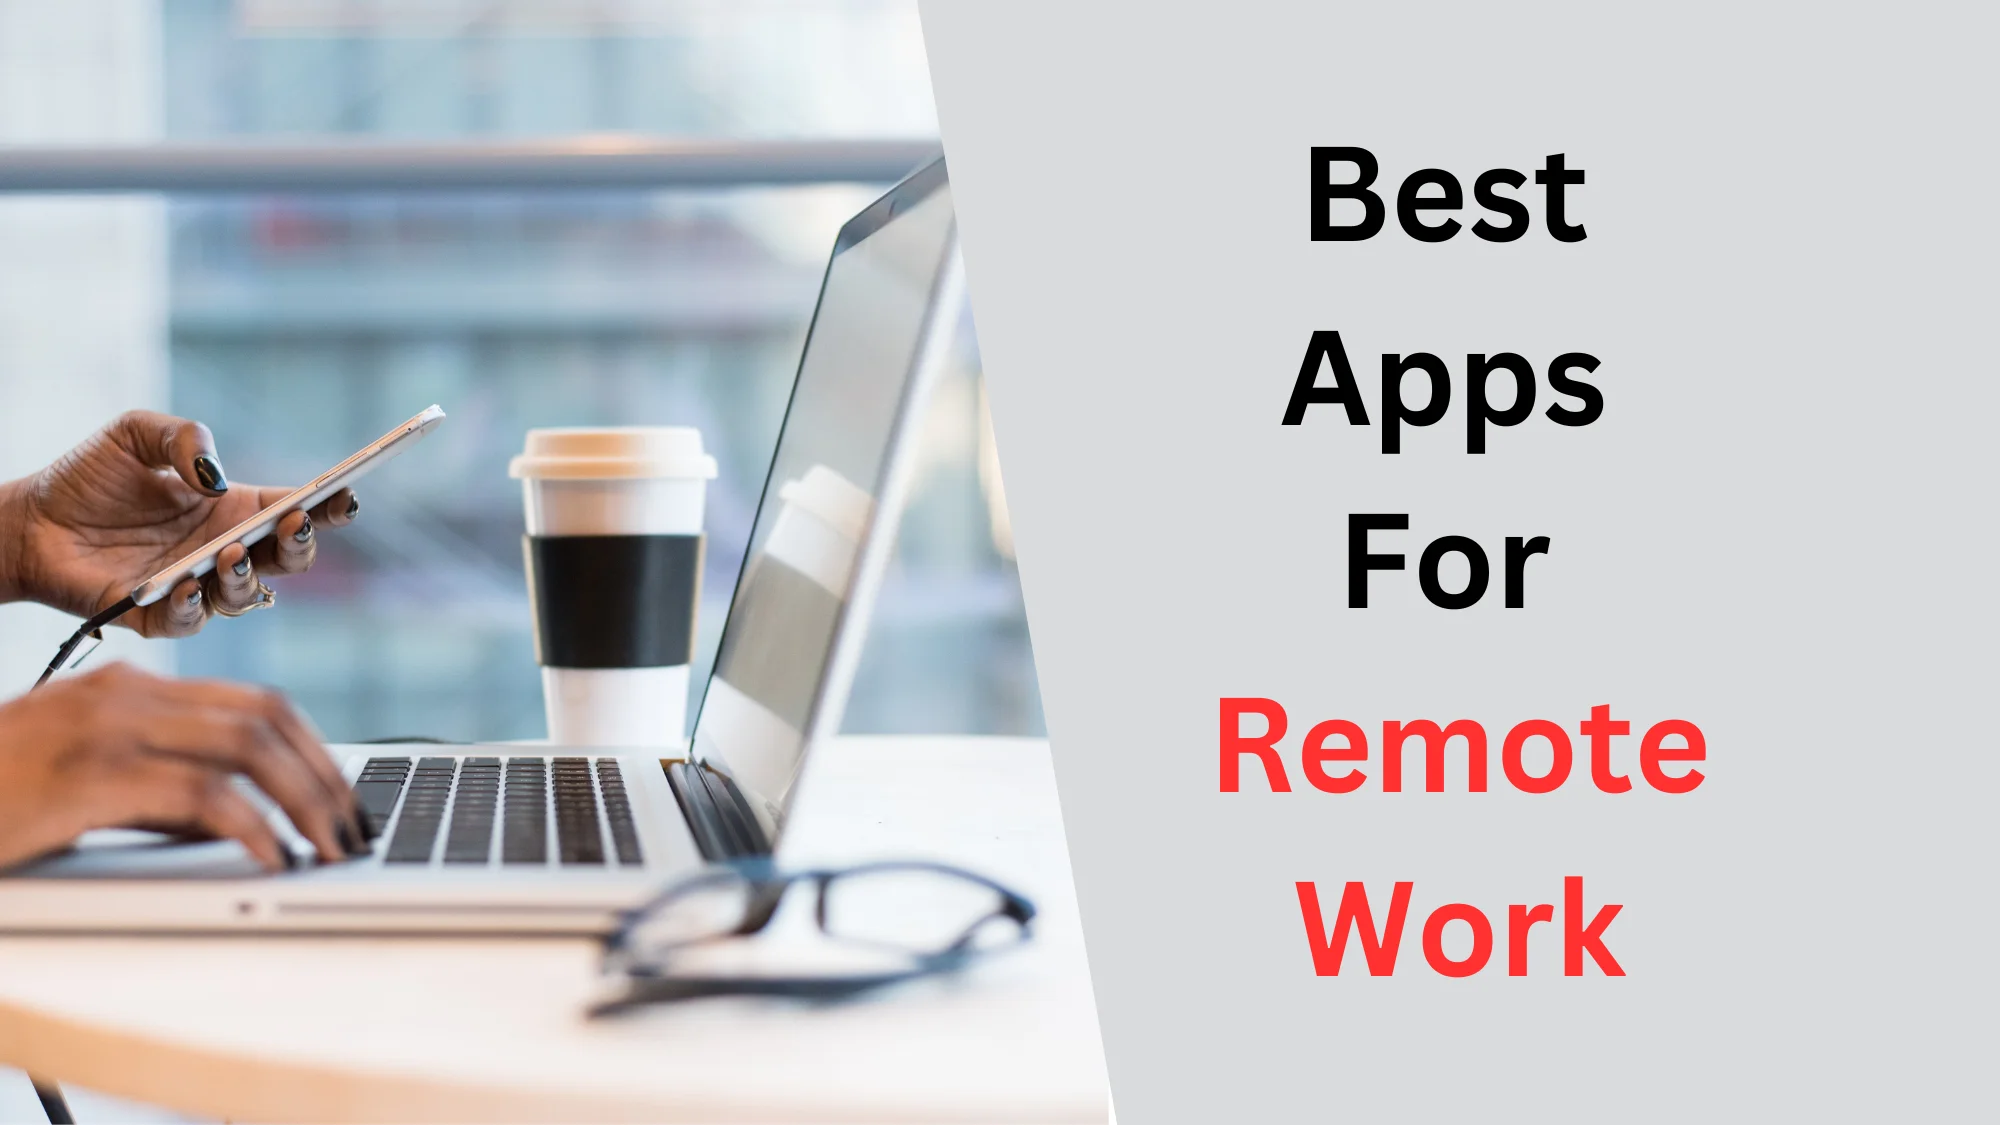 Best Productivity Apps For Remote Work